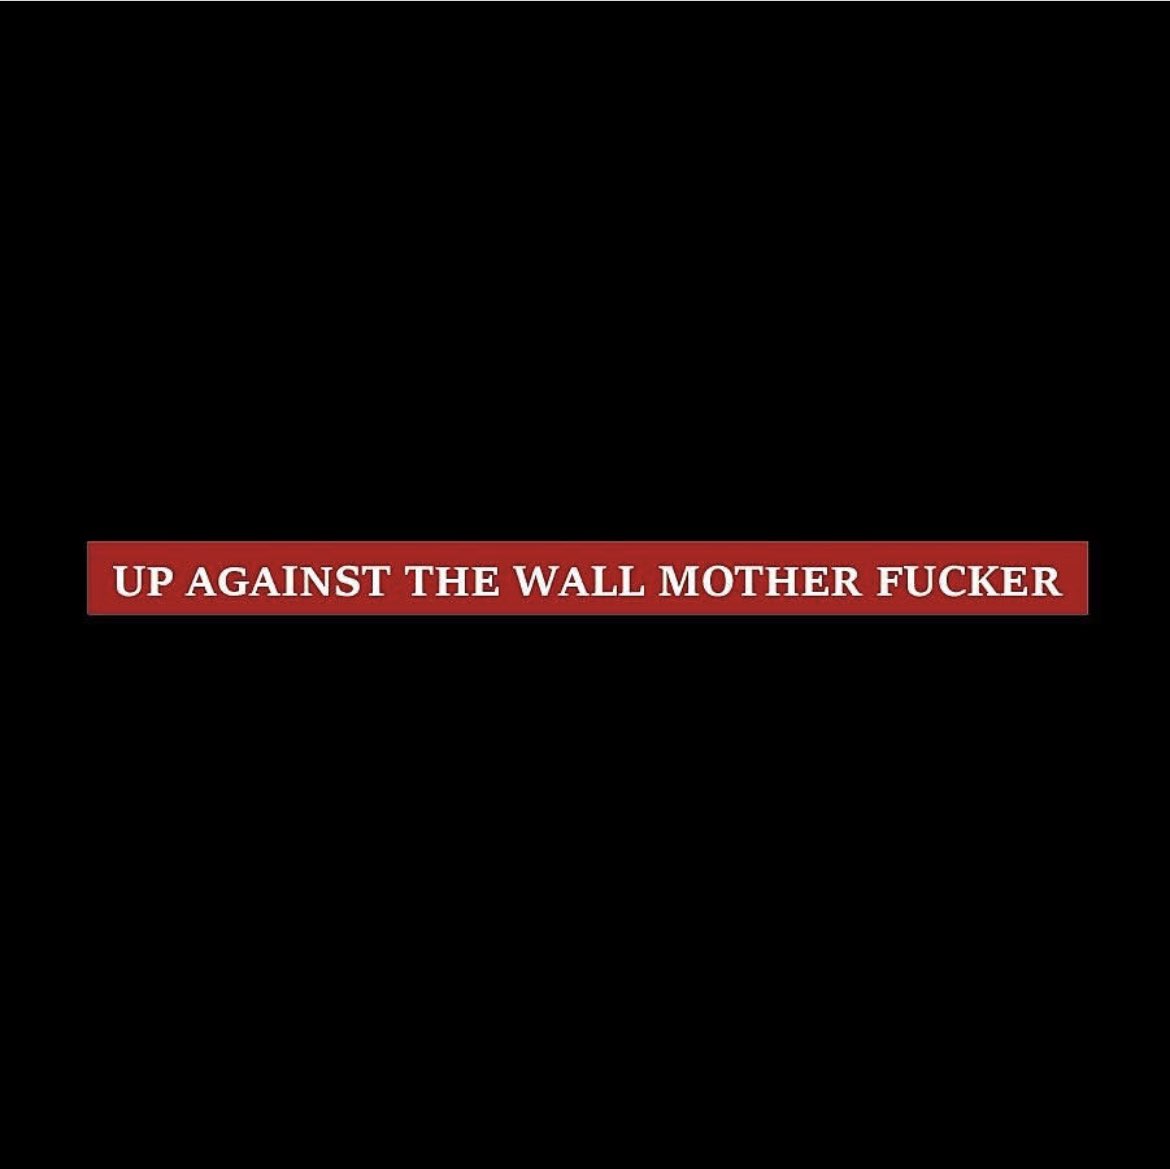 Up Against the Wall, Motherfucker (1968), via @PMPressOrg